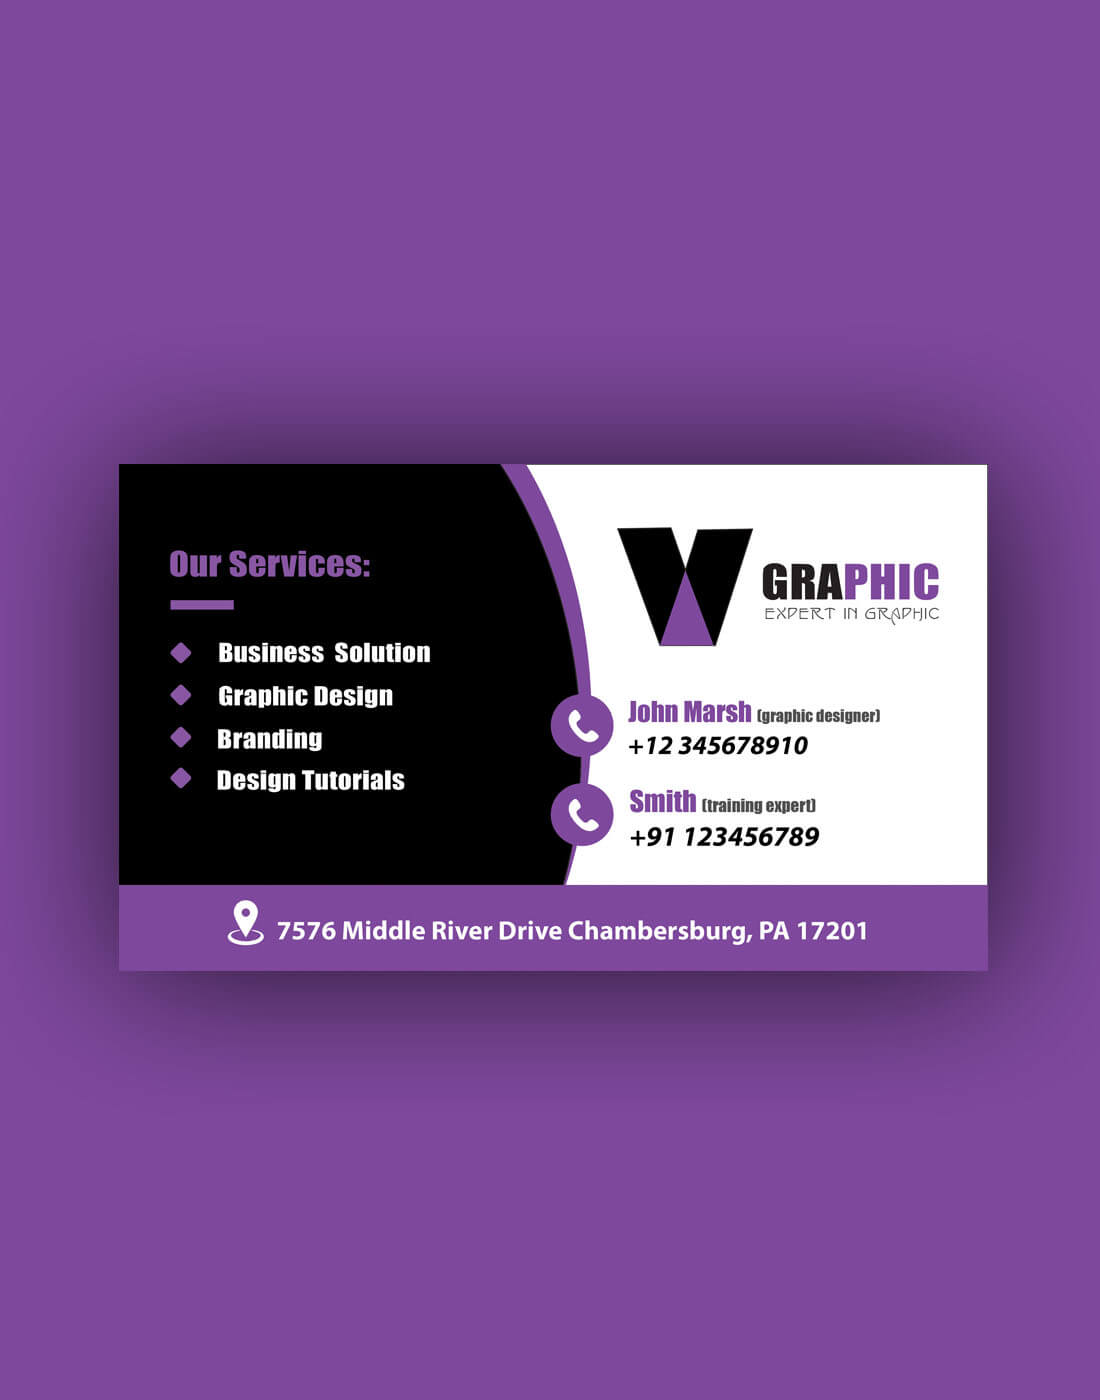 036 Office Business Card Template Ideas Phenomenal Open 8371 Pertaining To Office Max Business Card Template